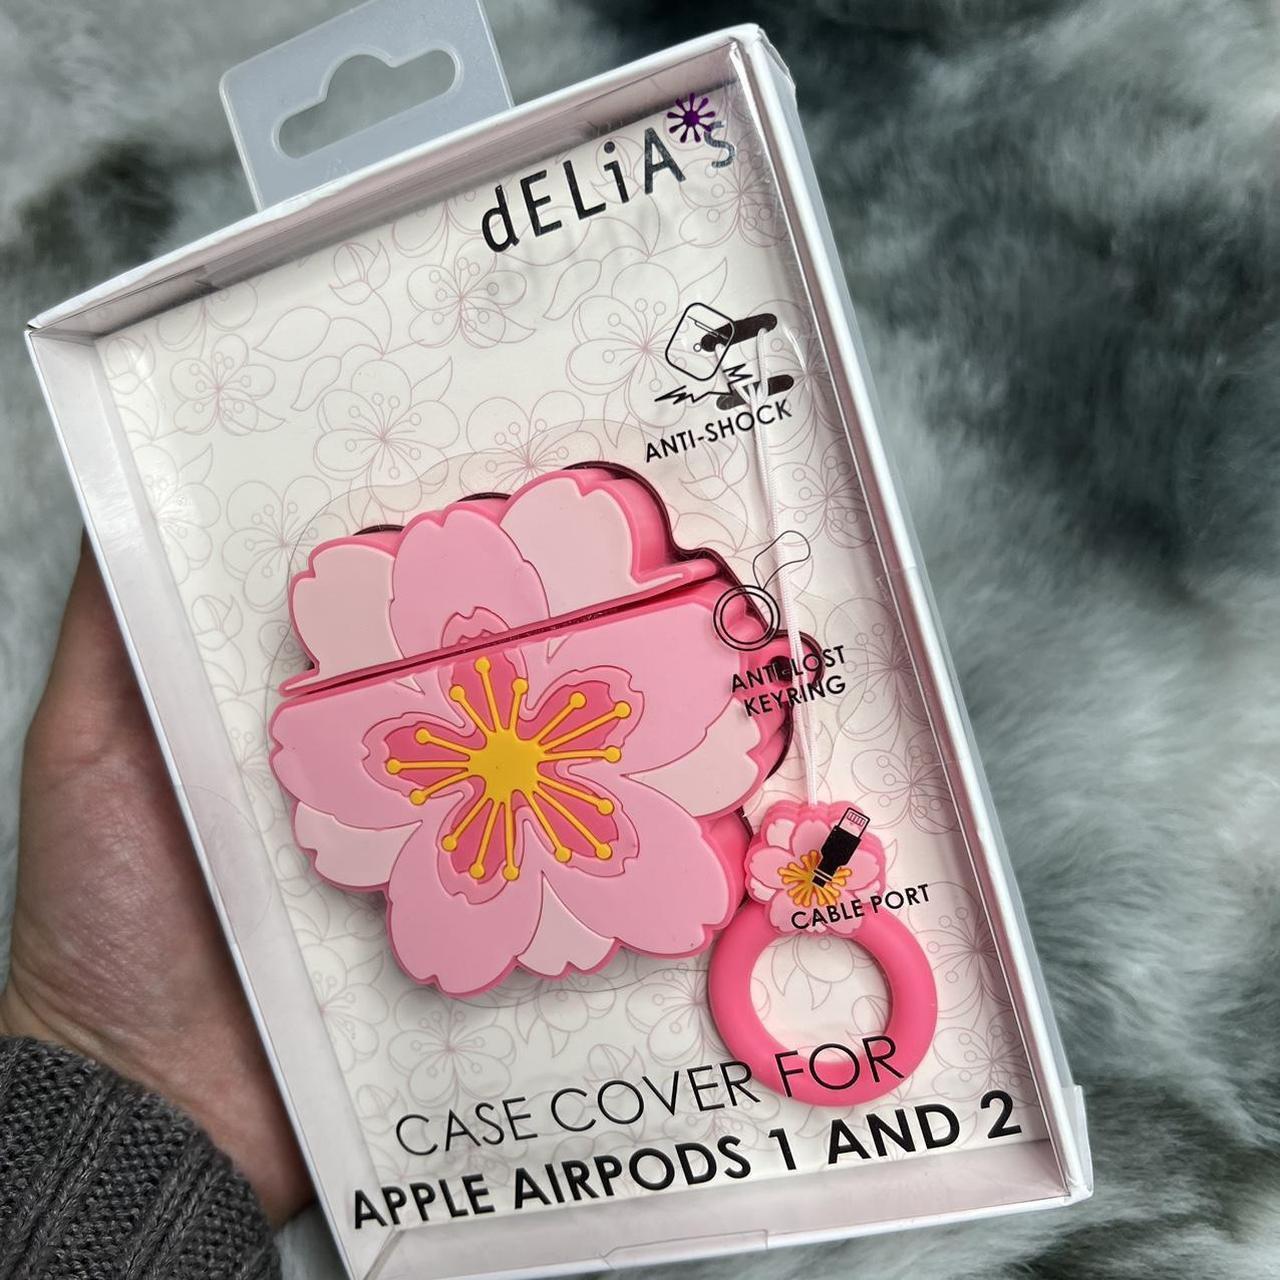 Brand new in box, Delias case cover for AirPods 1 & 2